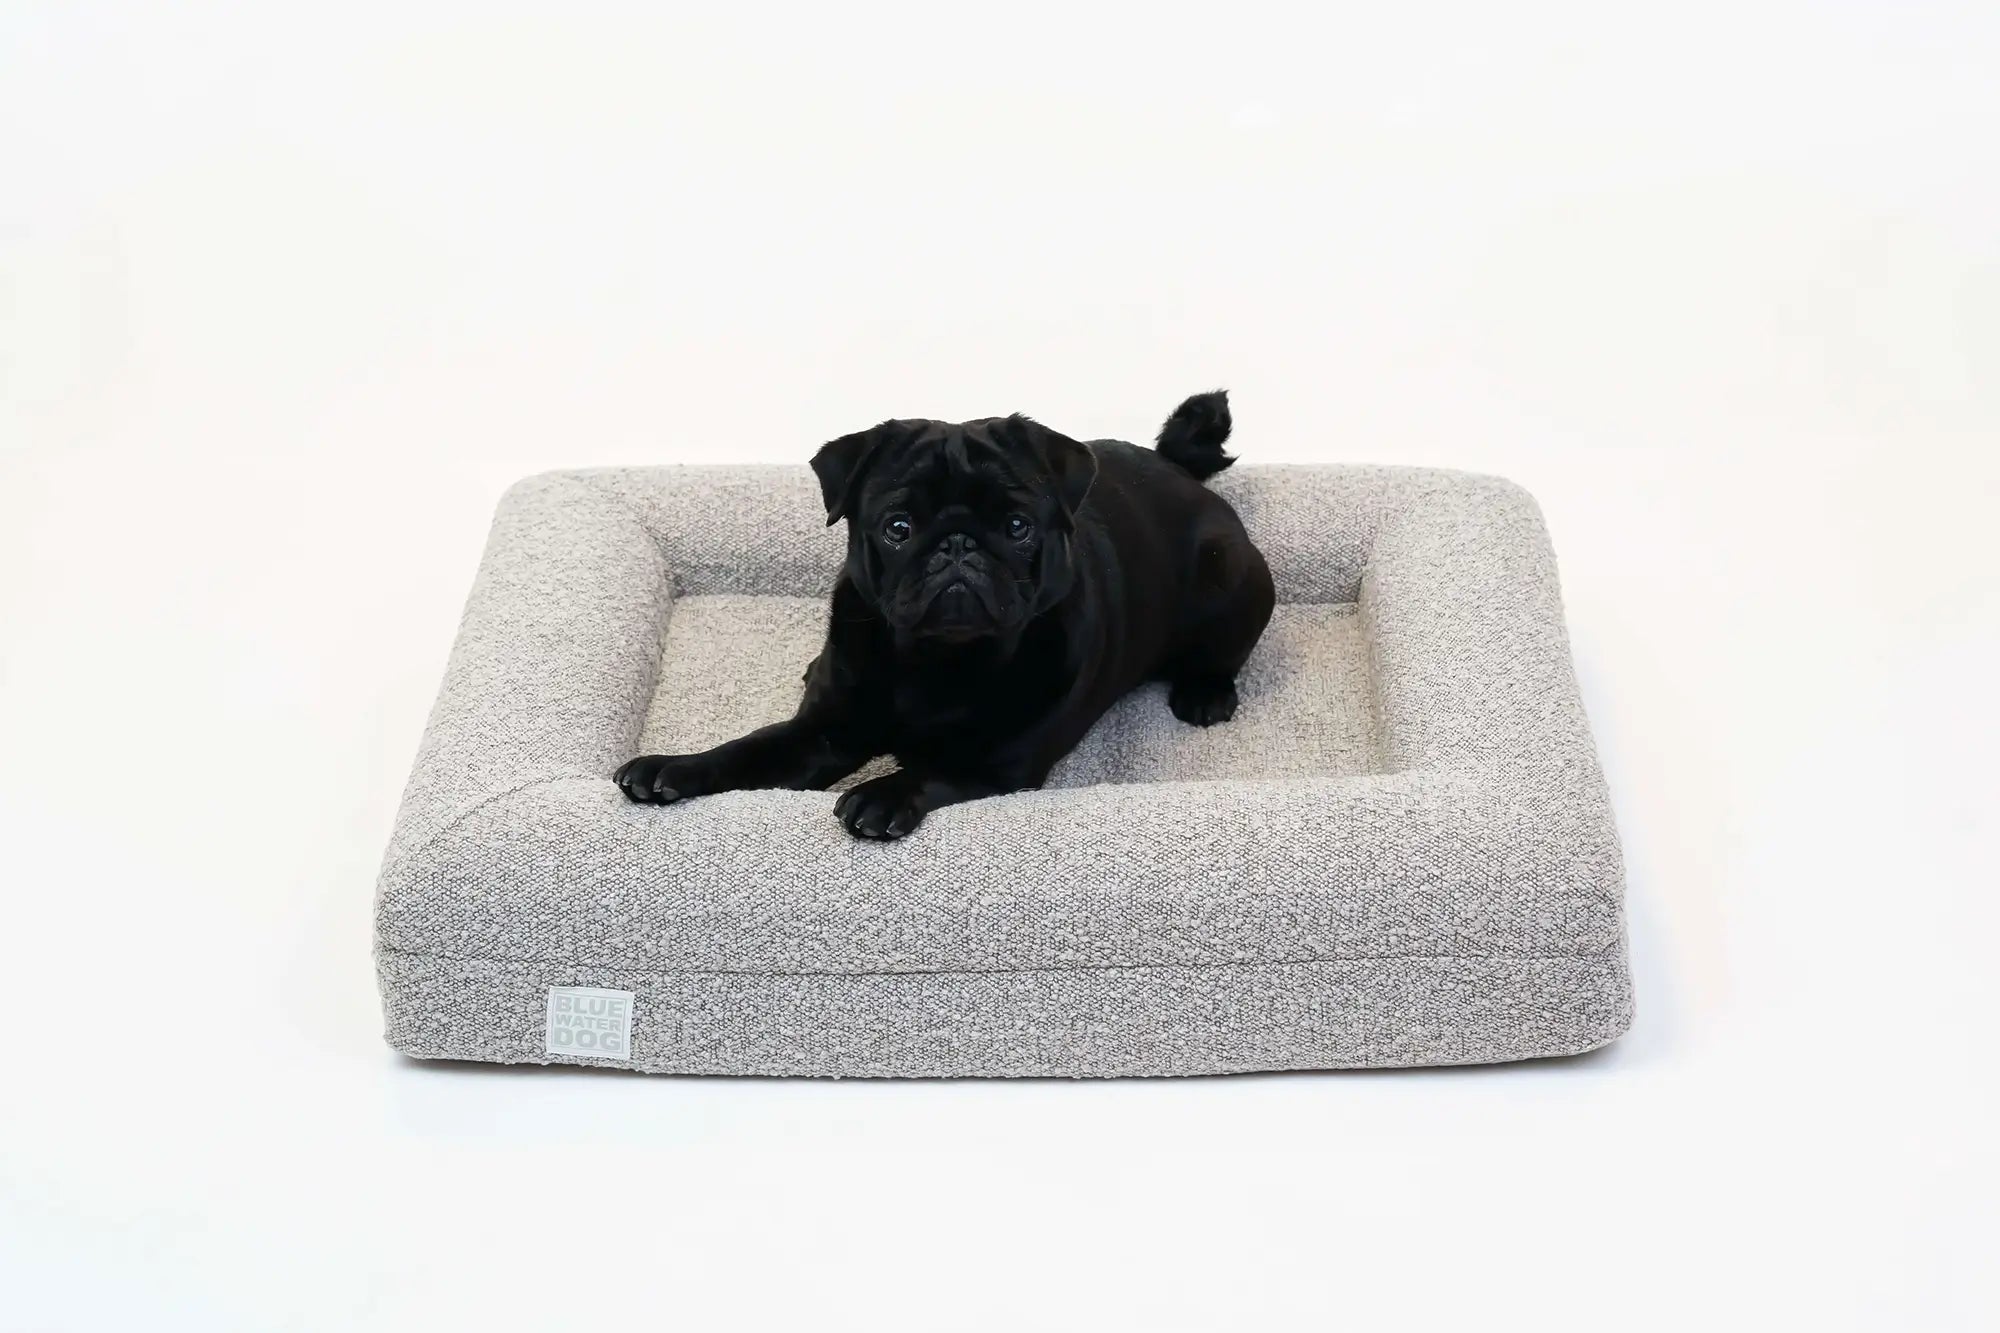 Pug laying on a small, sand-colored orthopedic memory foam boucle dog bed.